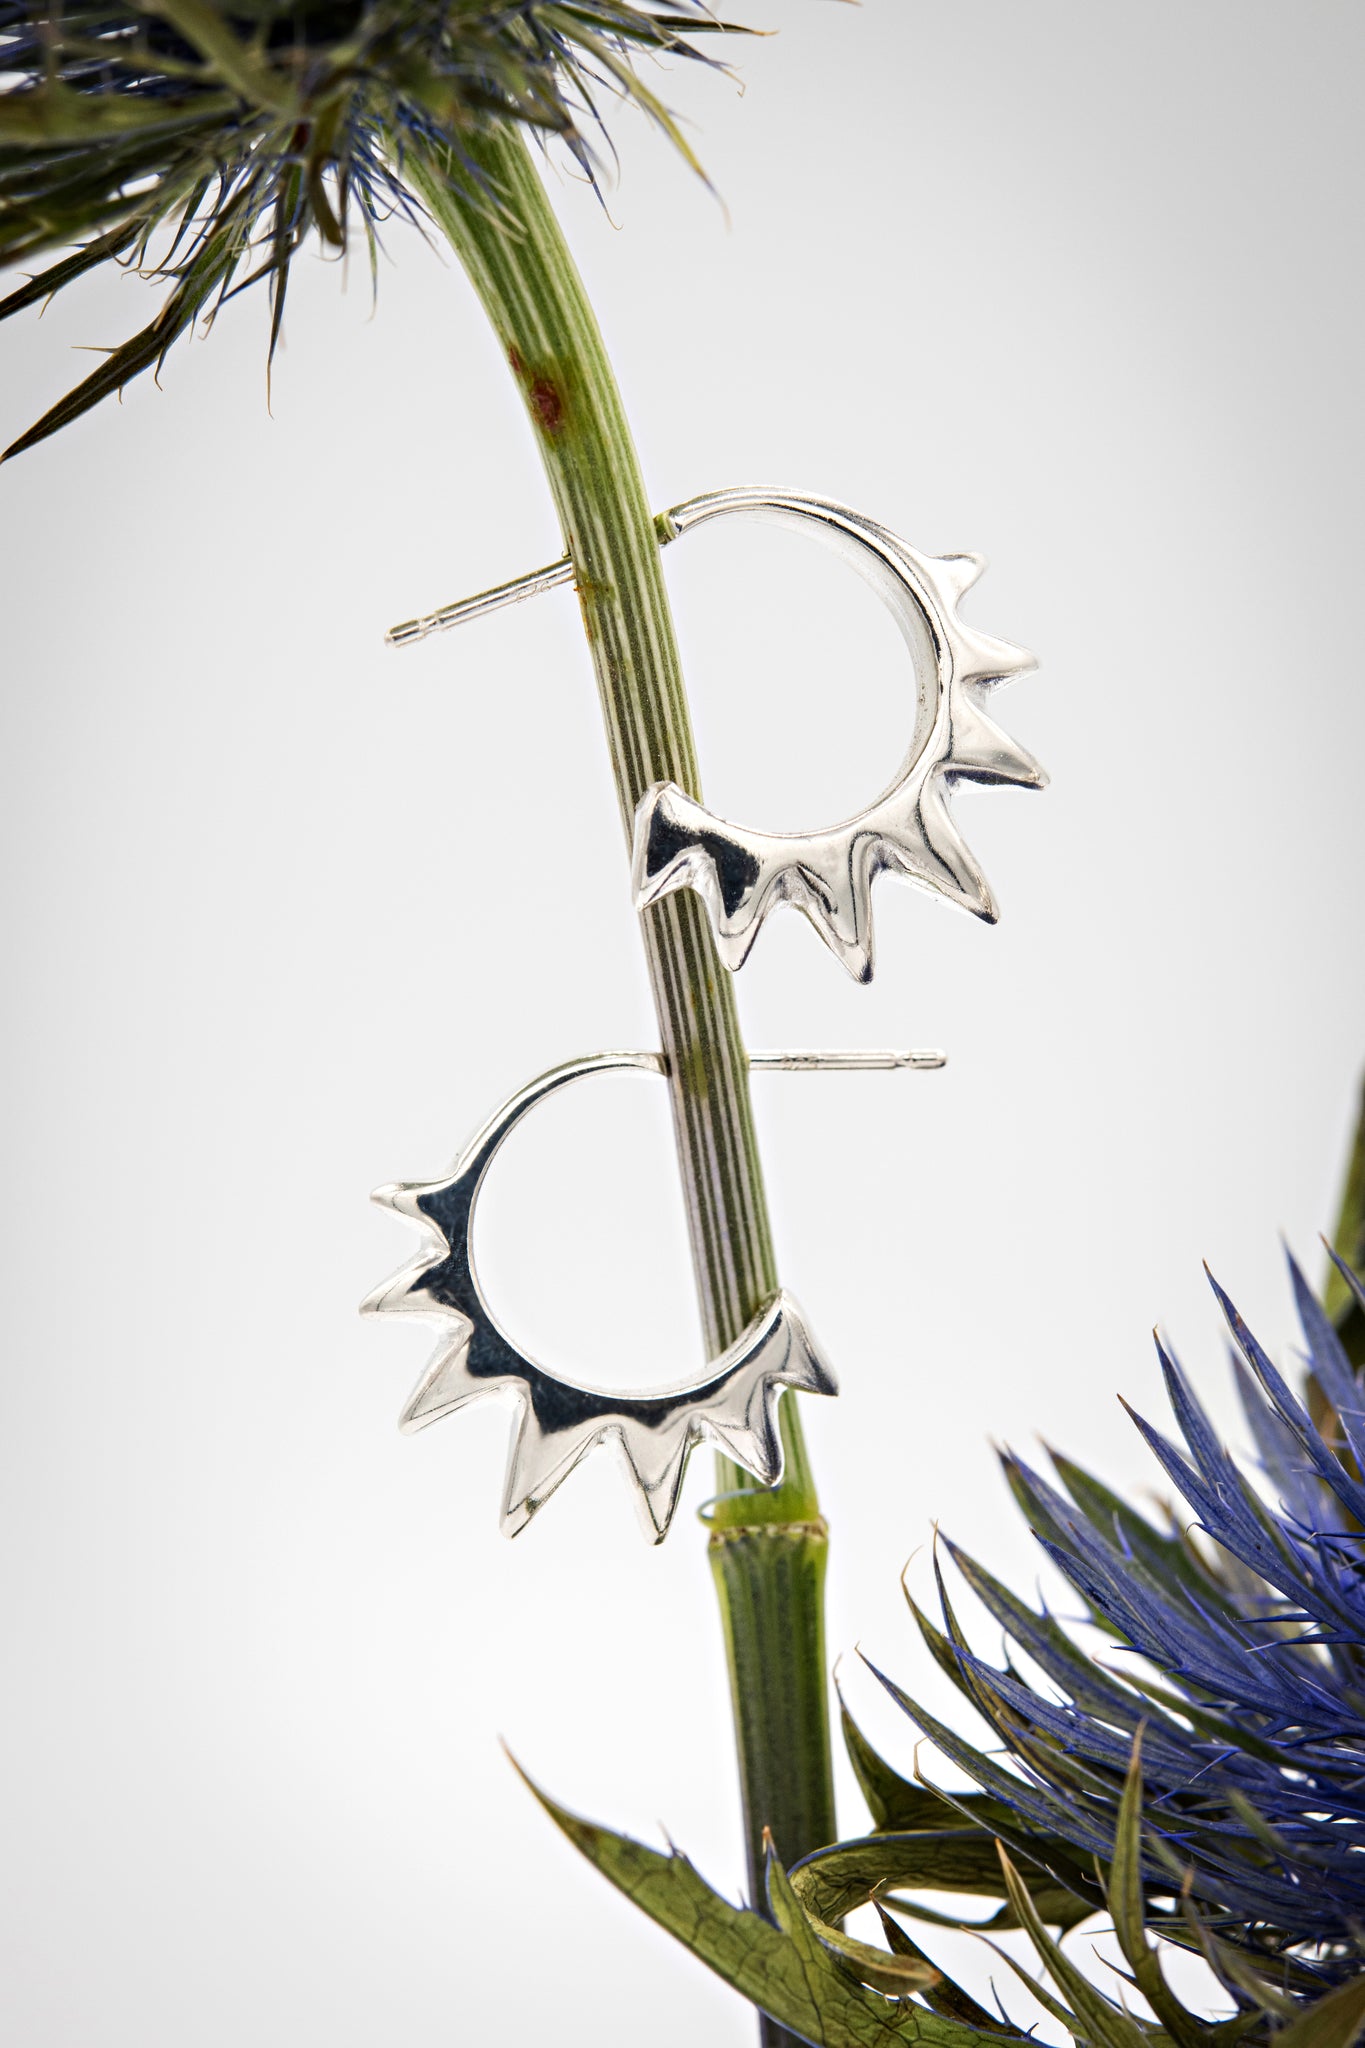 Limited Edition SPIKE Earrings cast in eco-friendly Sterling silver